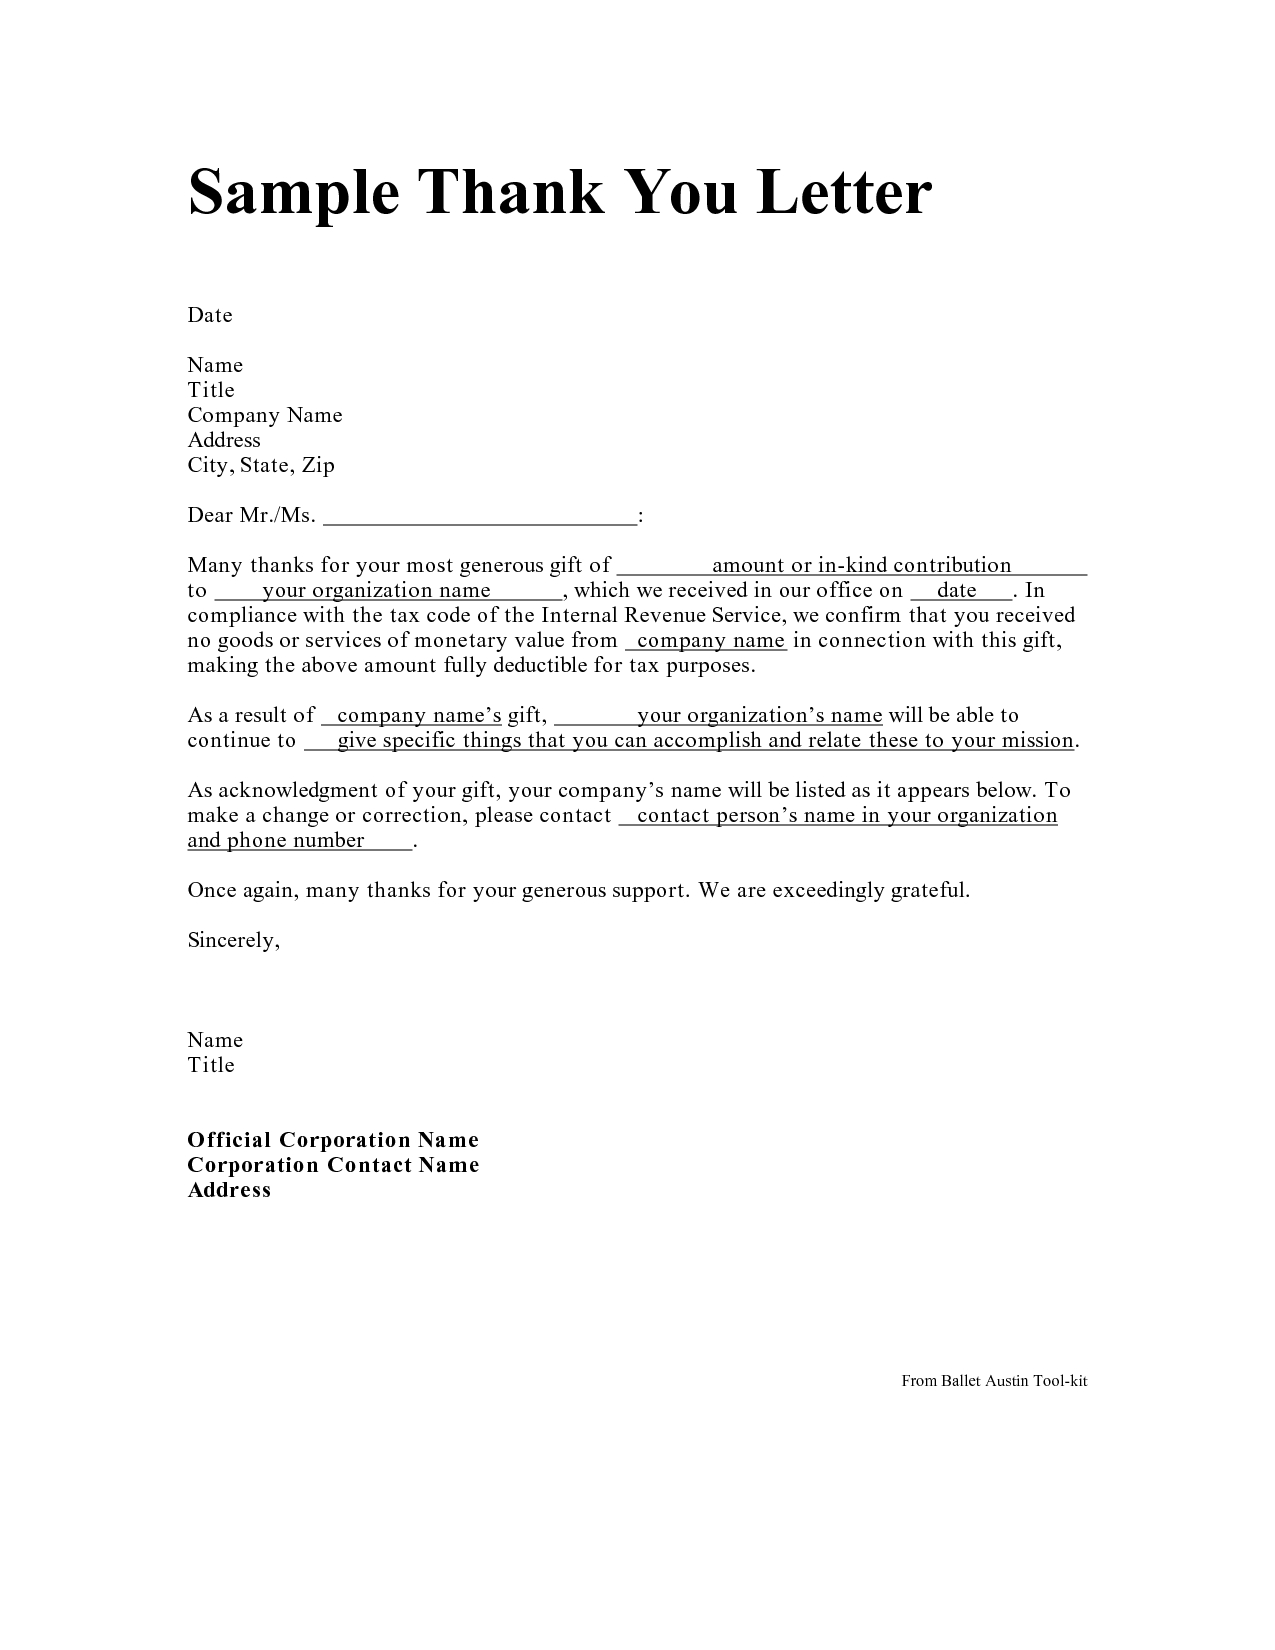 Internal Cover Letter Template - Personal Thank You Letter Personal Thank You Letter Samples